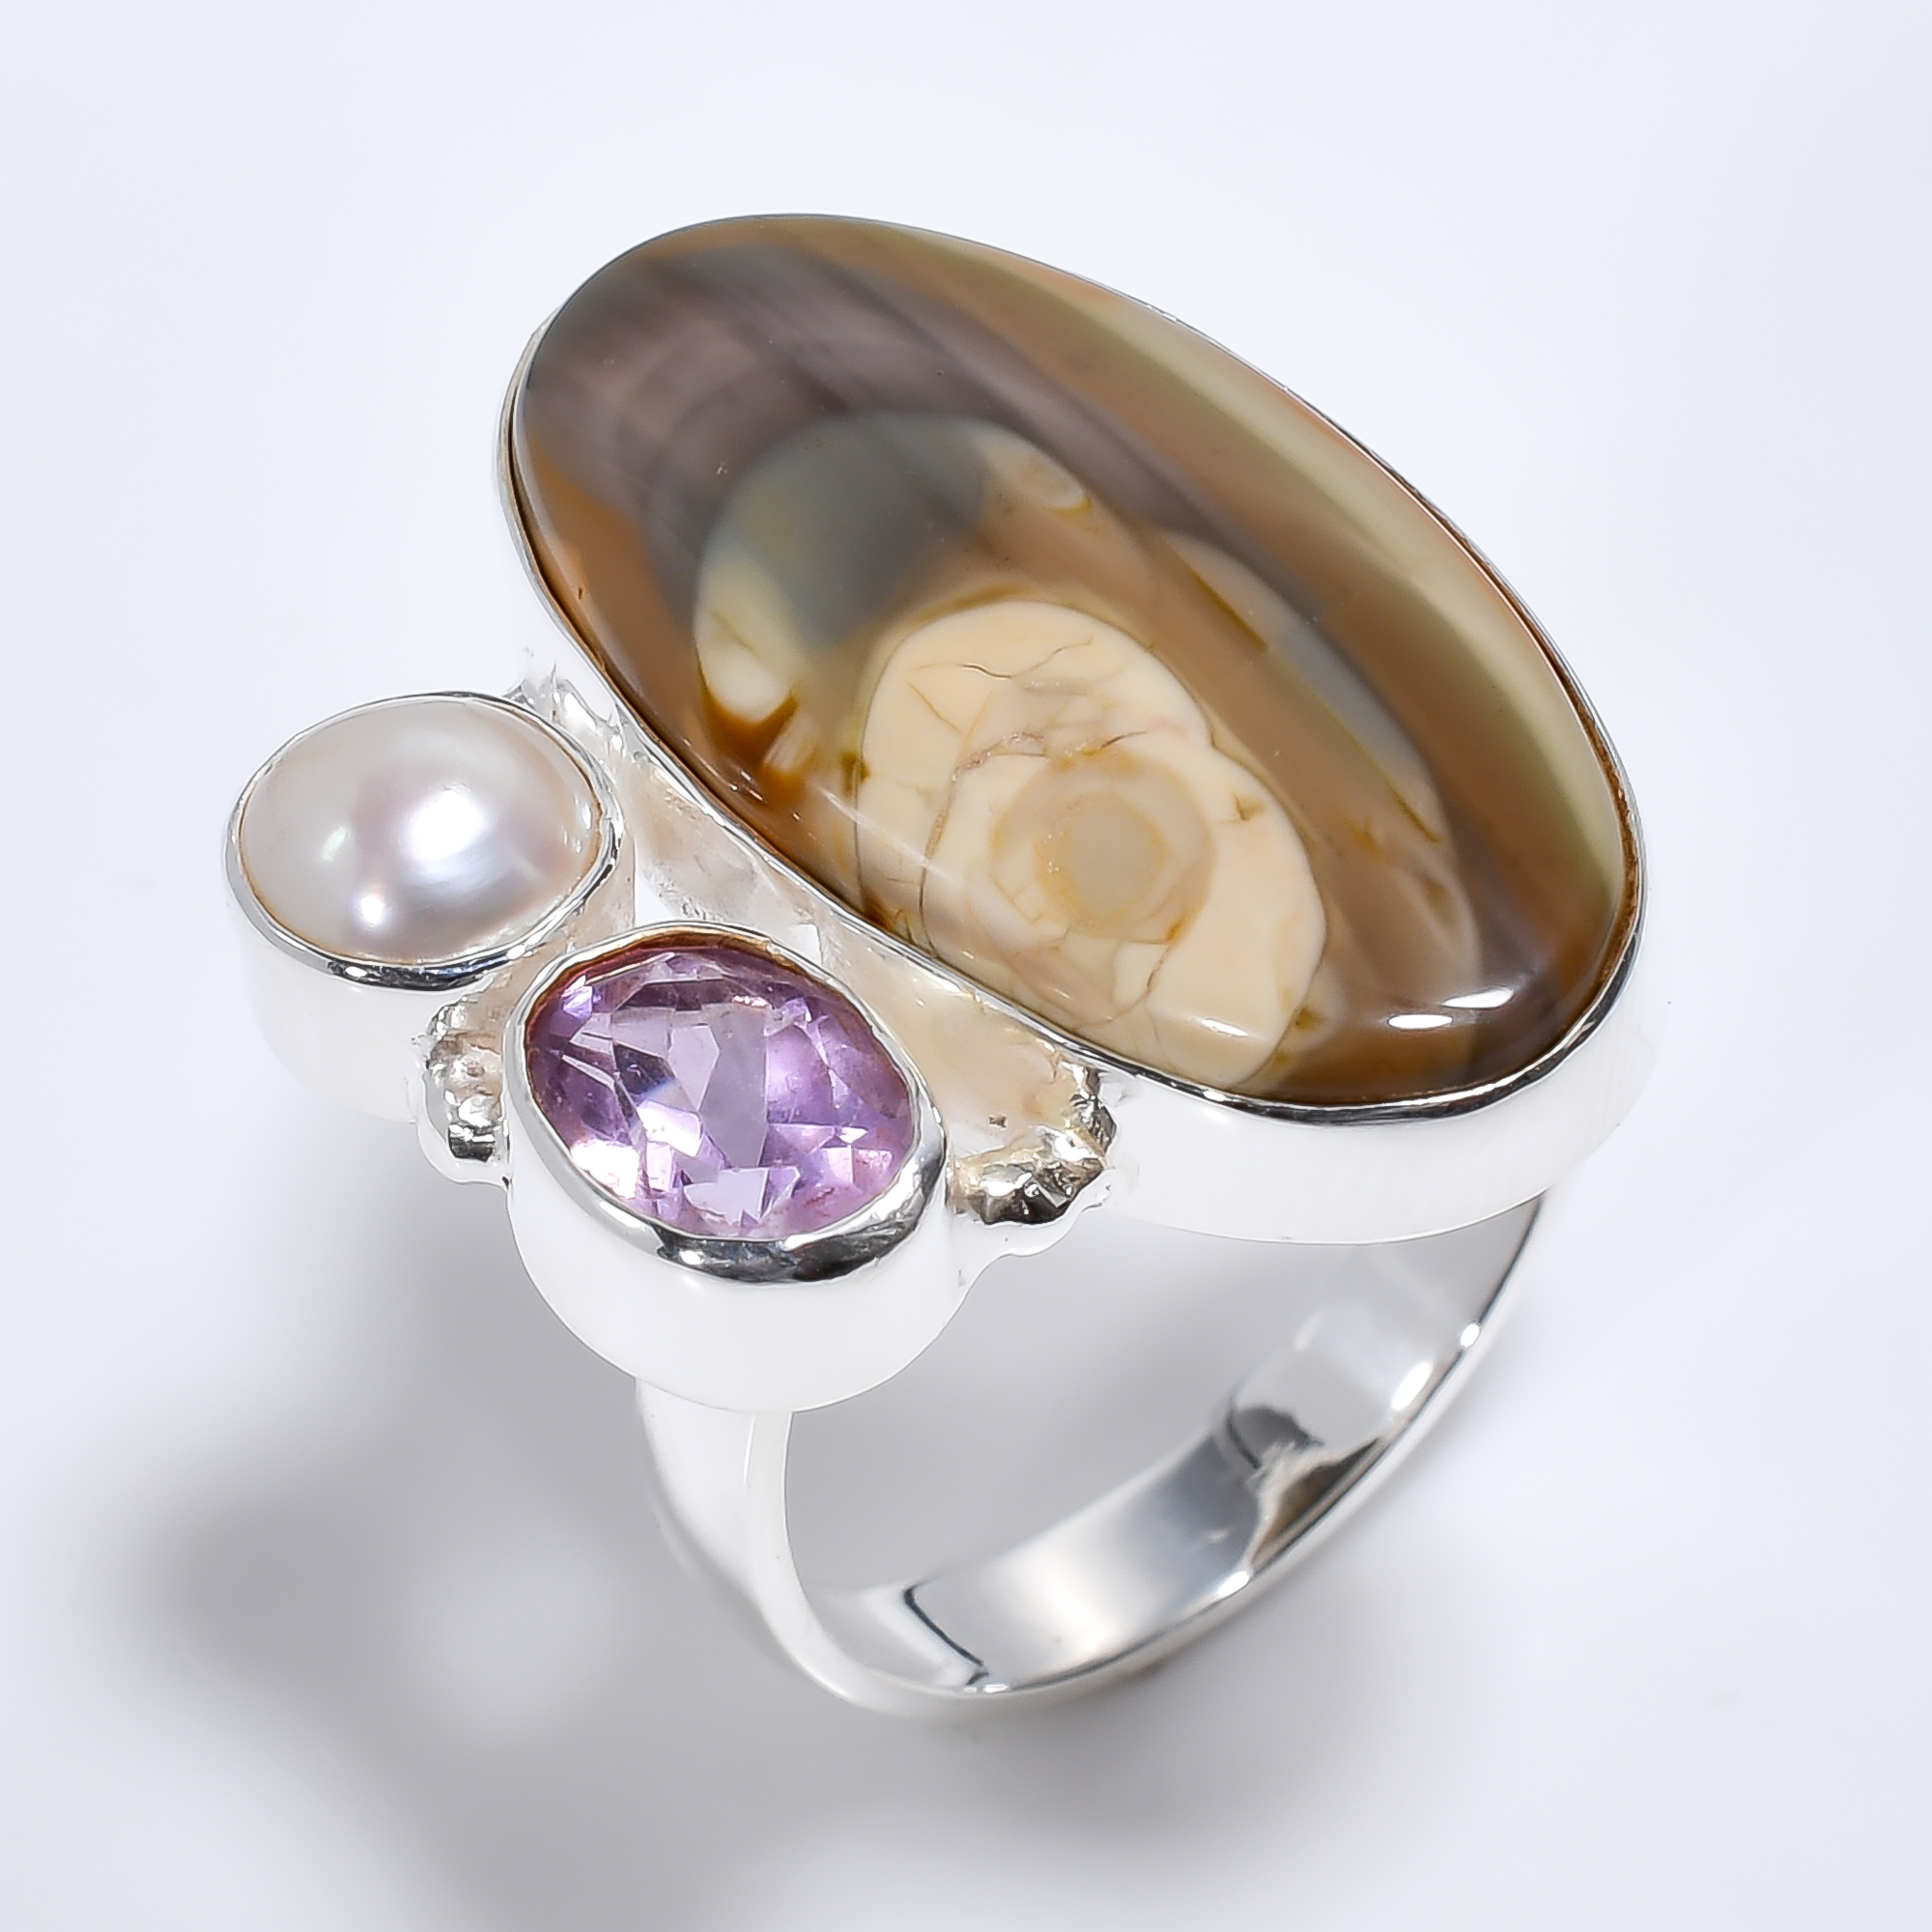 Natural Crazy Lace Agate Citrine Gemstone 925 Sterling Silver Ring Size US 7 Women Fashion Rings Suppier